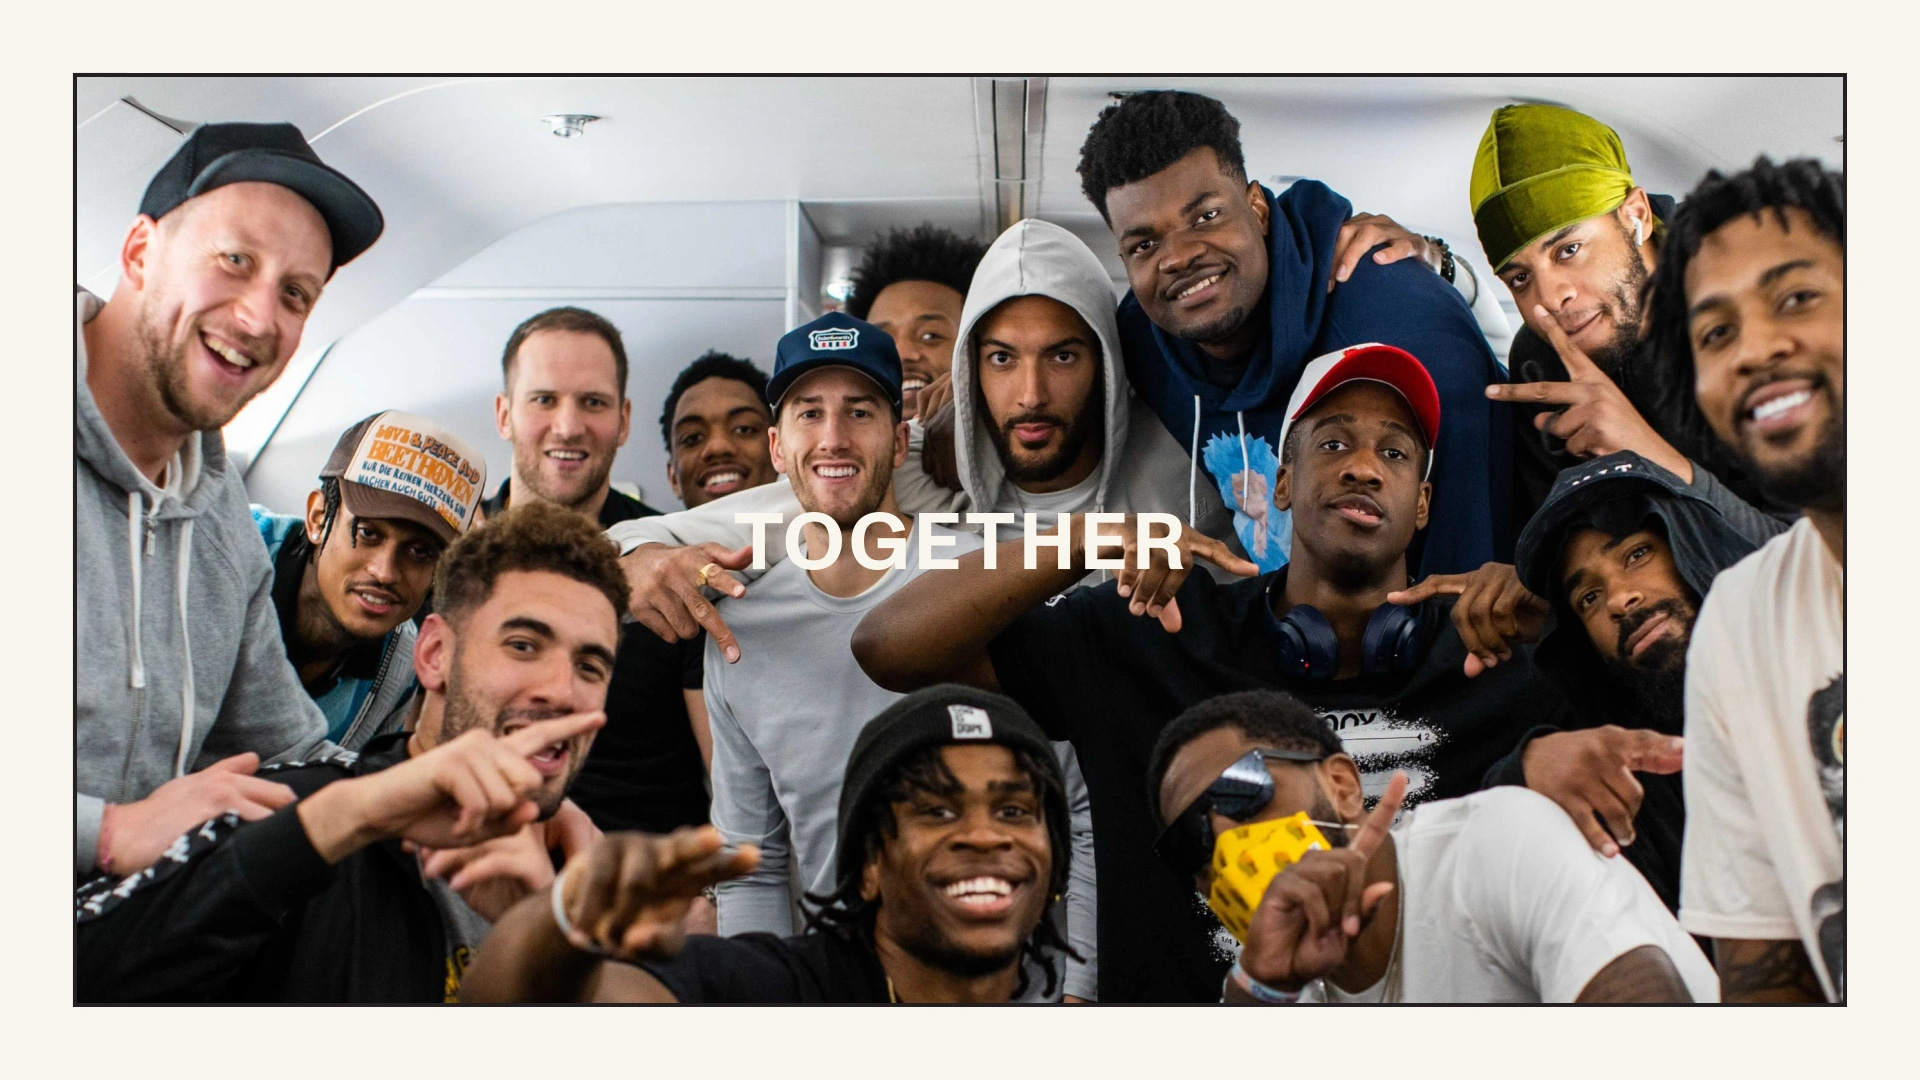 Editorial composition with a photography of the Utah Jazz team and the word "together" in the center.